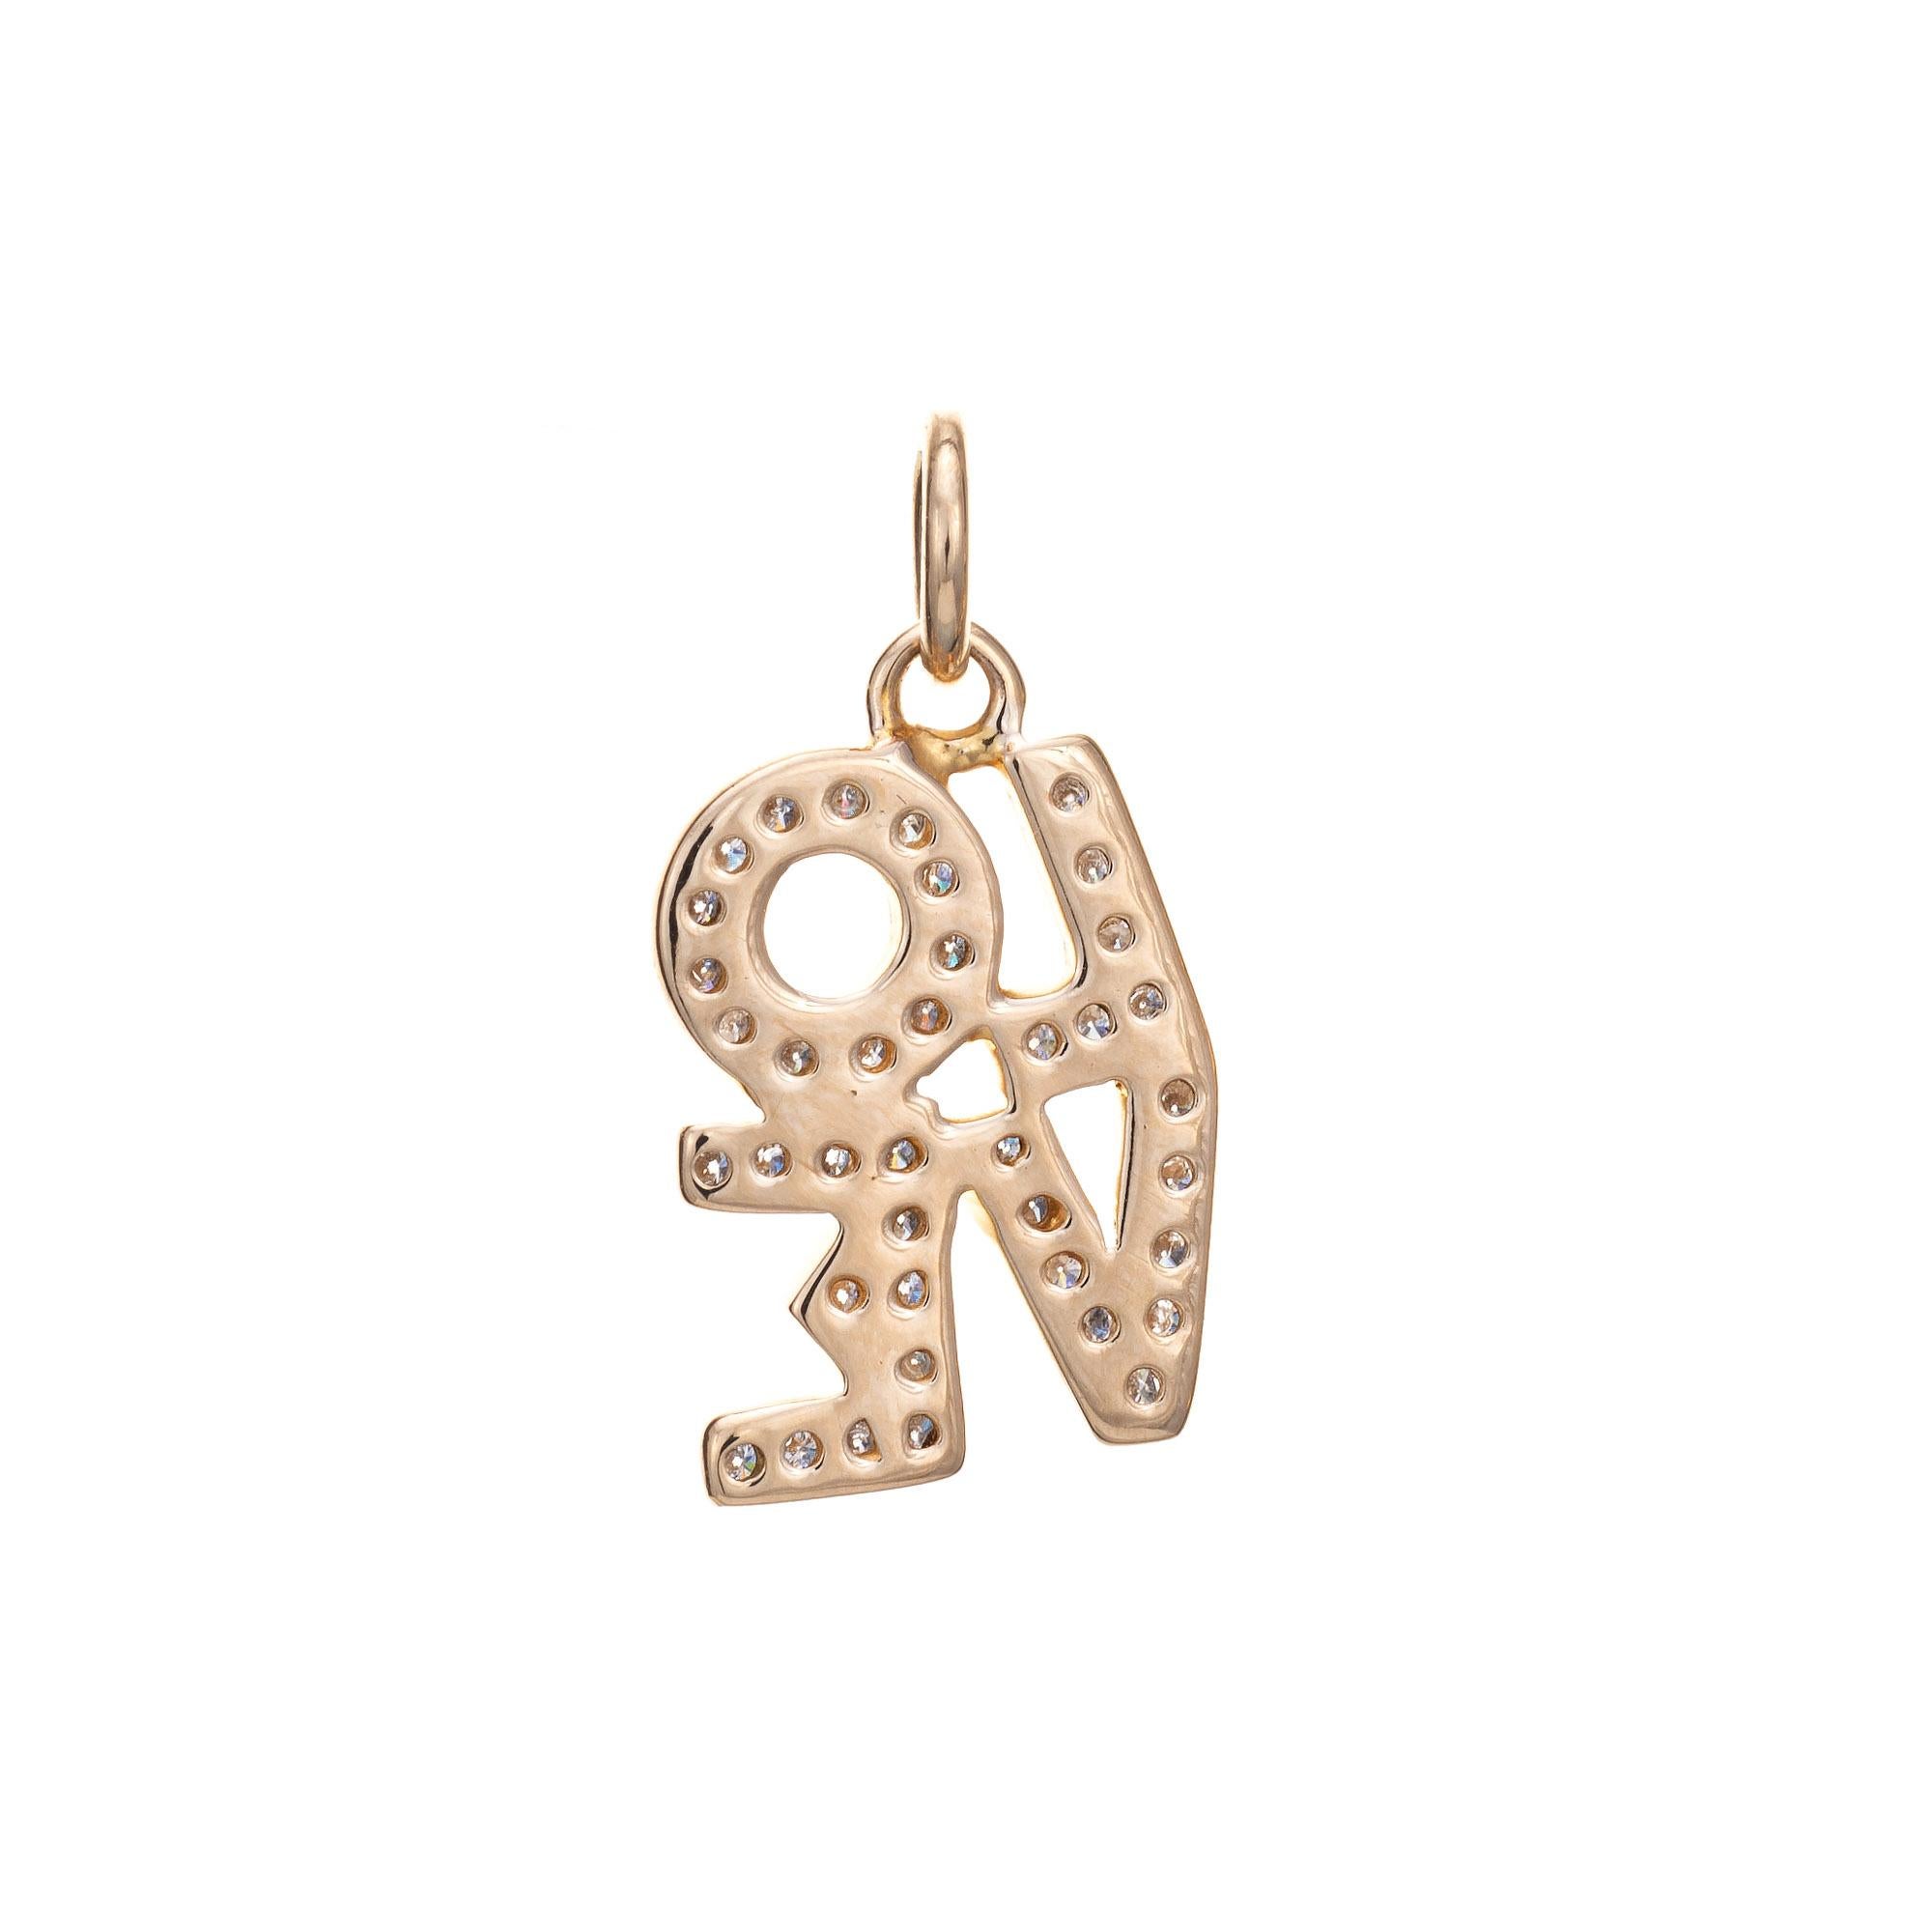 Stylish vintage diamond LOVE pendant crafted in 14k yellow gold (circa 1970s). 

Diamonds total an estimated 0.25 carats (estimated at H-I color and SI1-I1 clarity).

Smaller in scale in a block letter design, the love pendant can be worn as a charm